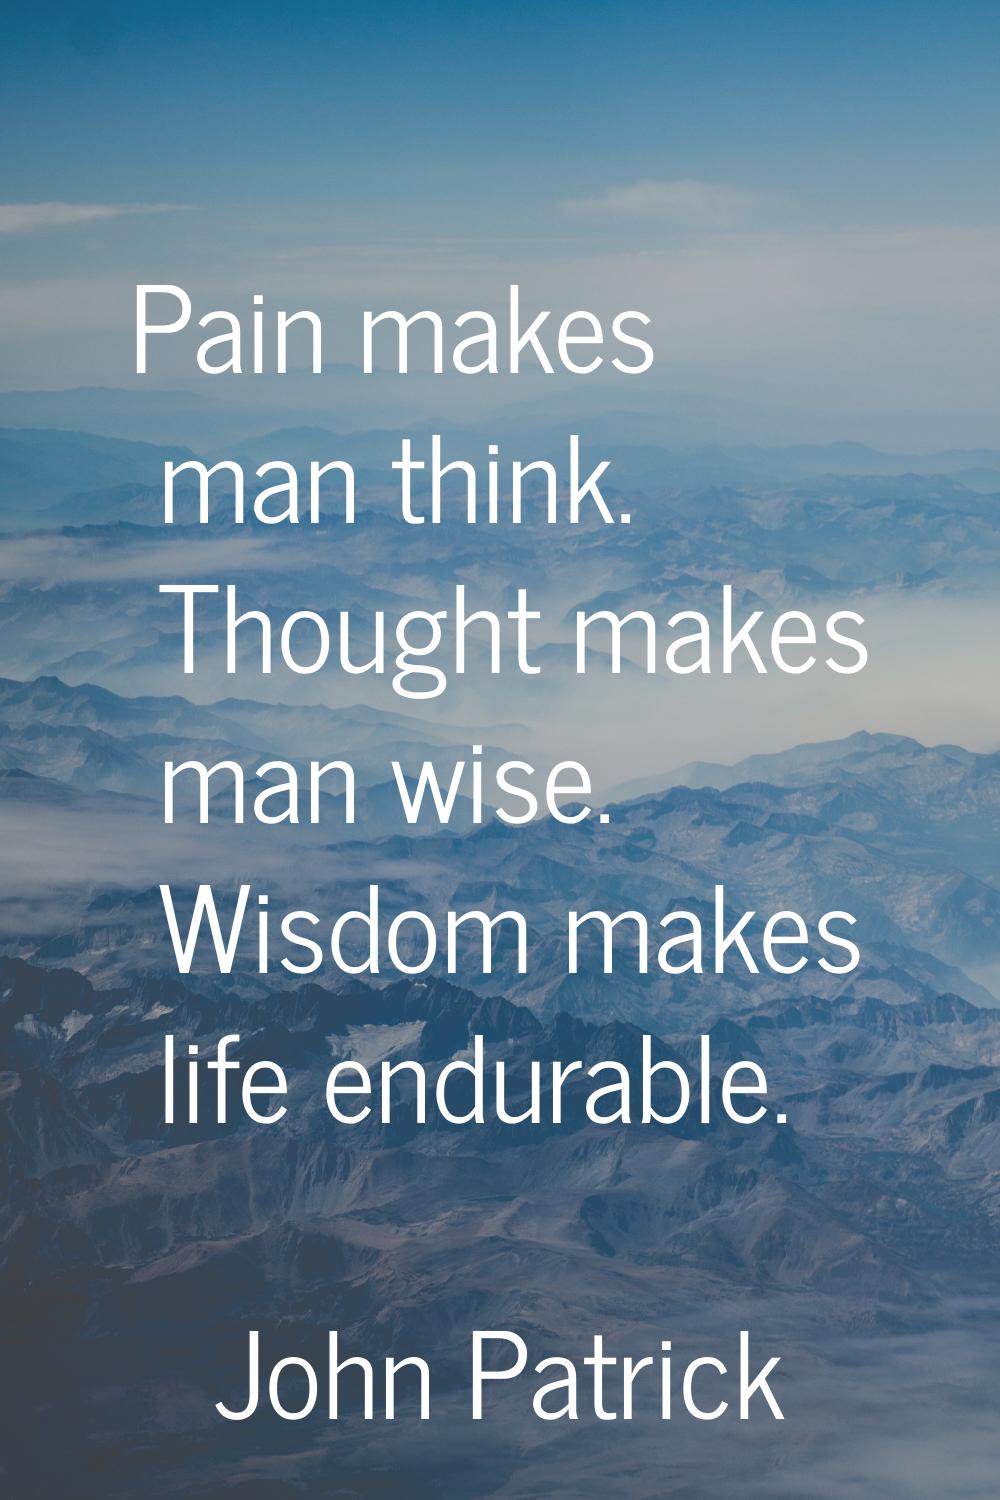 Pain makes man think. Thought makes man wise. Wisdom makes life endurable.